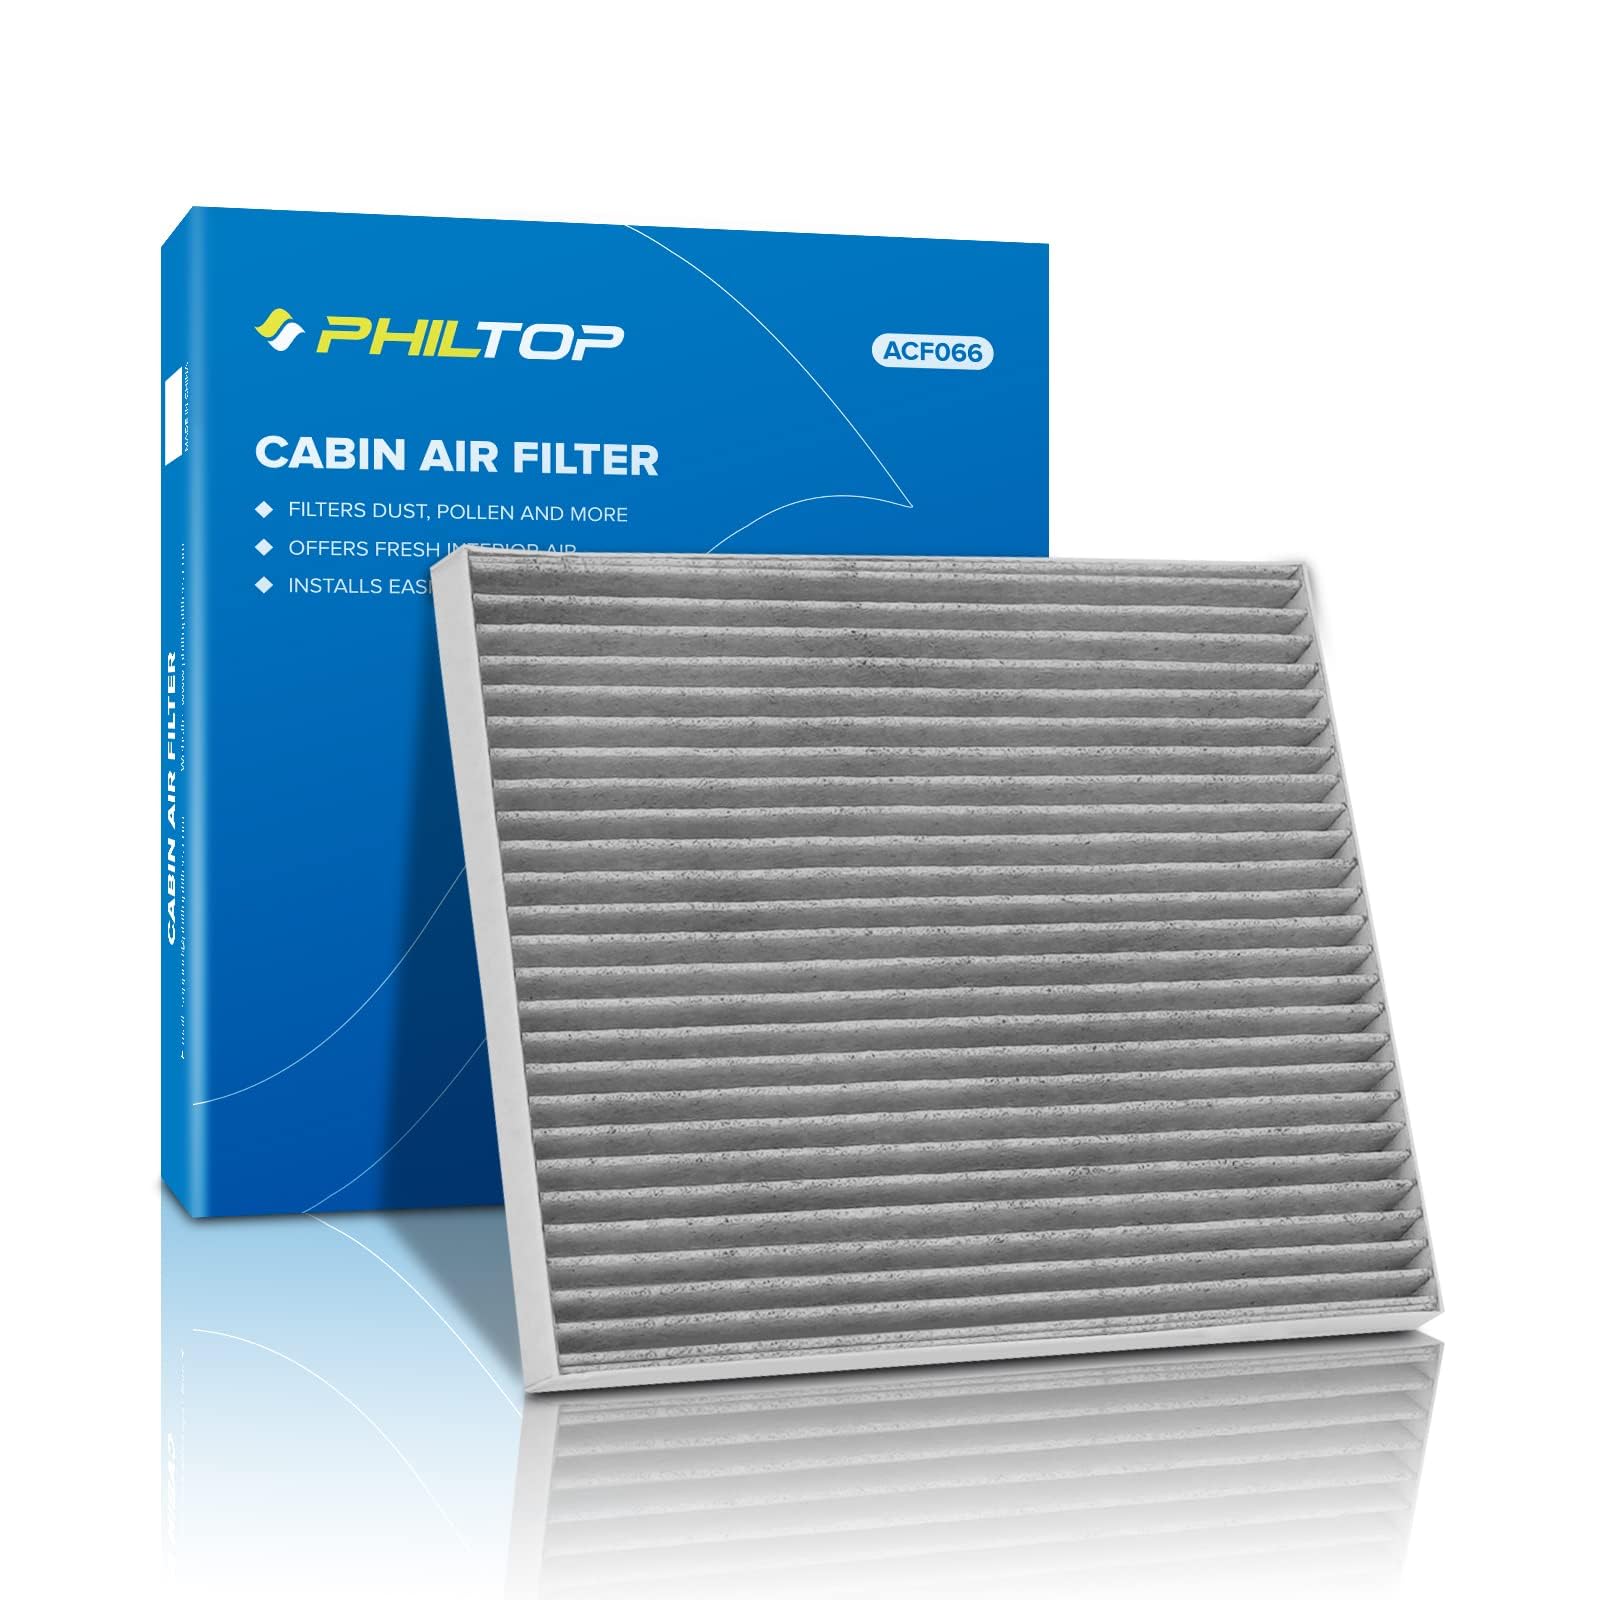 ZASTION PHILTOP Cabin Air Filter, Replacement for CF12283, Pacifica(2017-2021), Voyager(2020-2021), Grand Caravan(2021), Premium Cabin Filter with Activated Carbon Filter, Pack of 1 von PHILTOP